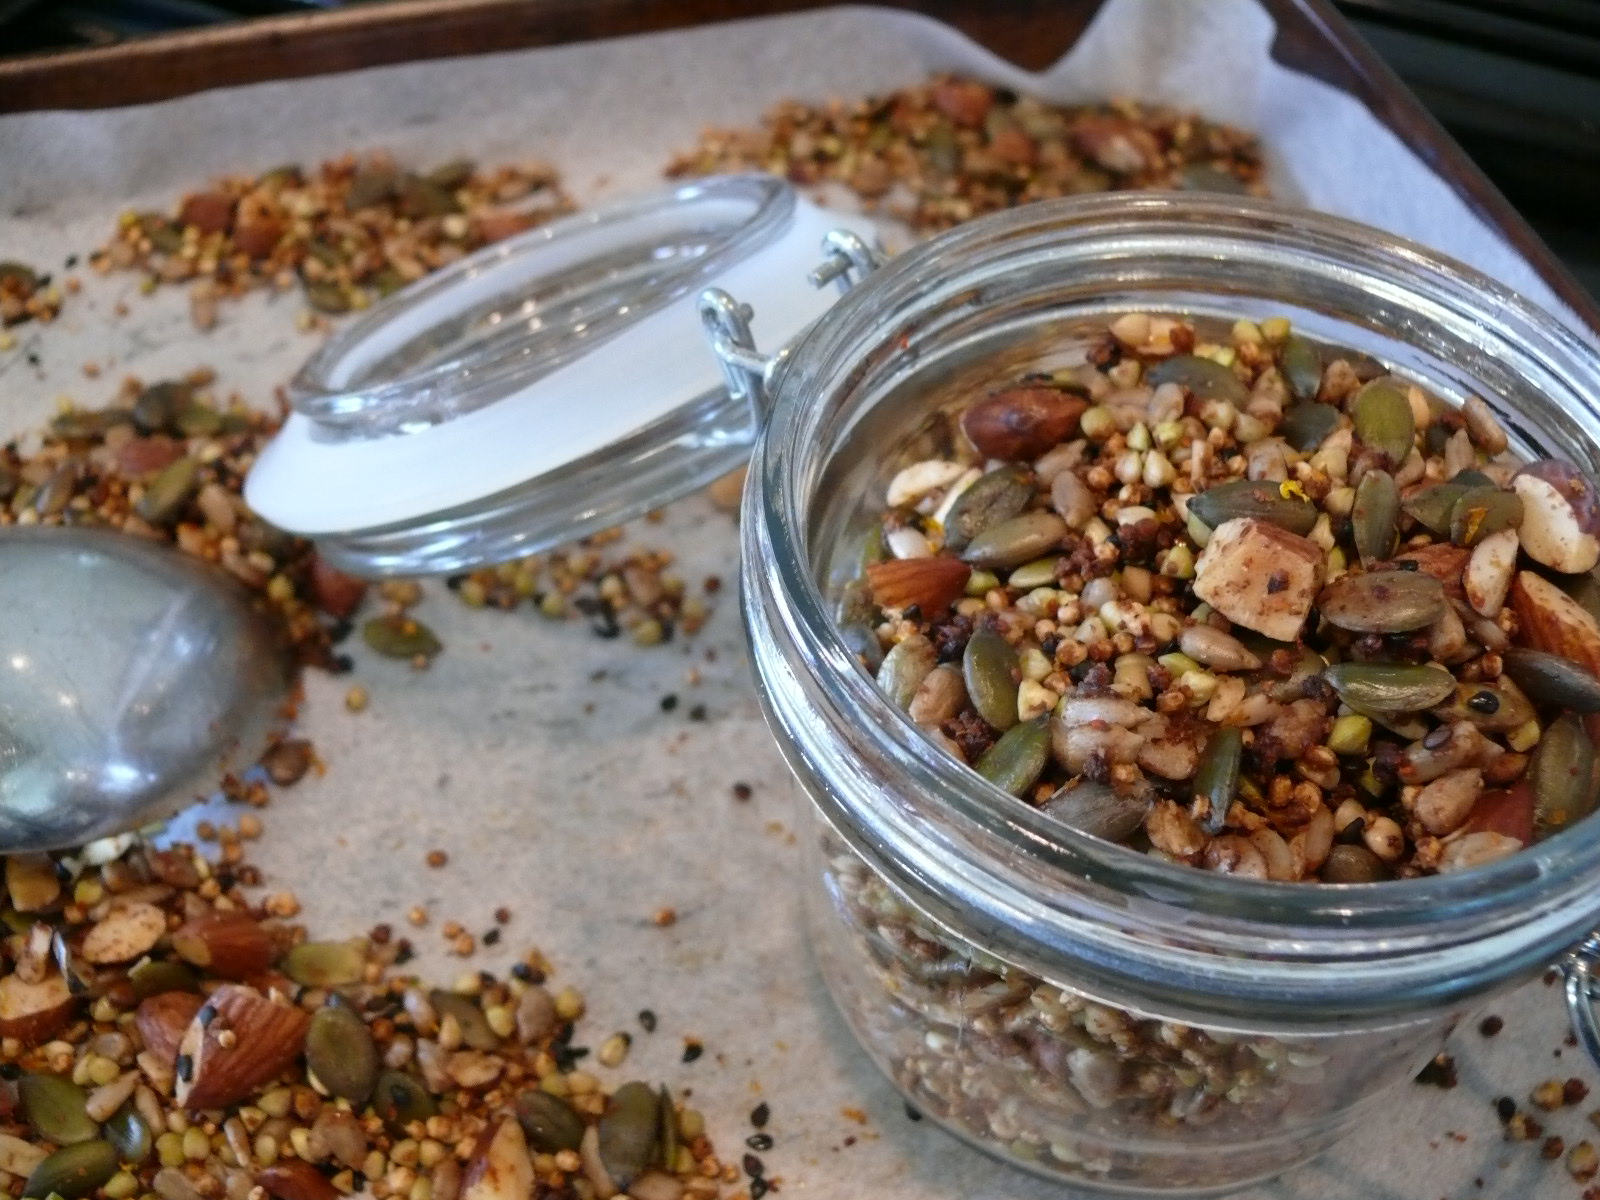 puffed and toasted seed and nut mix